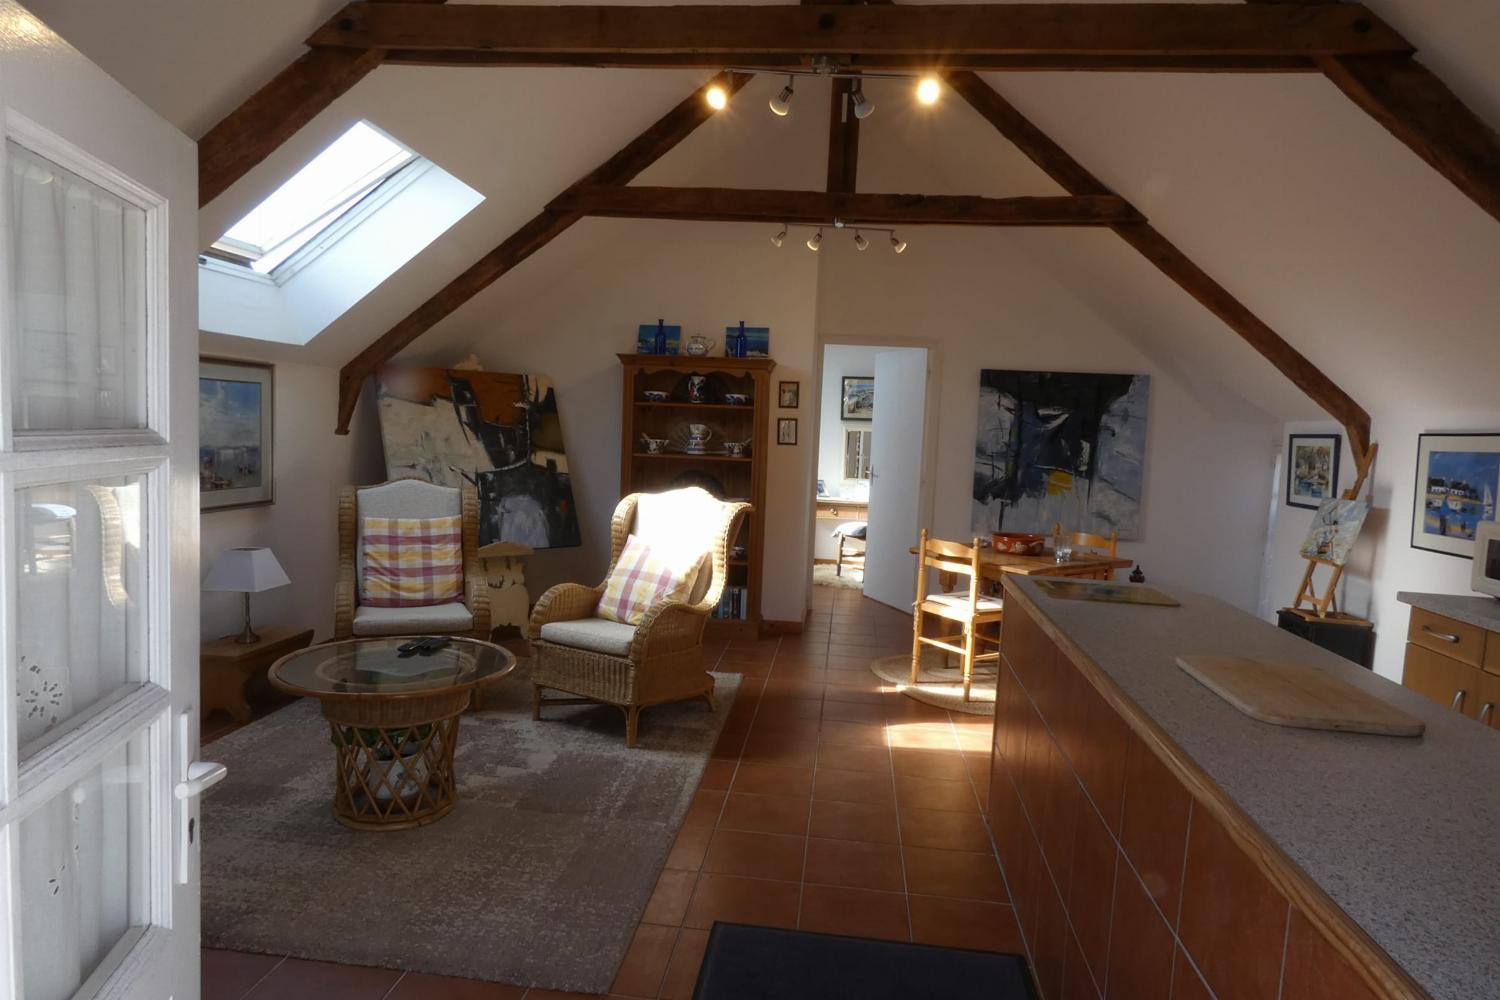 Sitting room | Rental cottage in Brittany